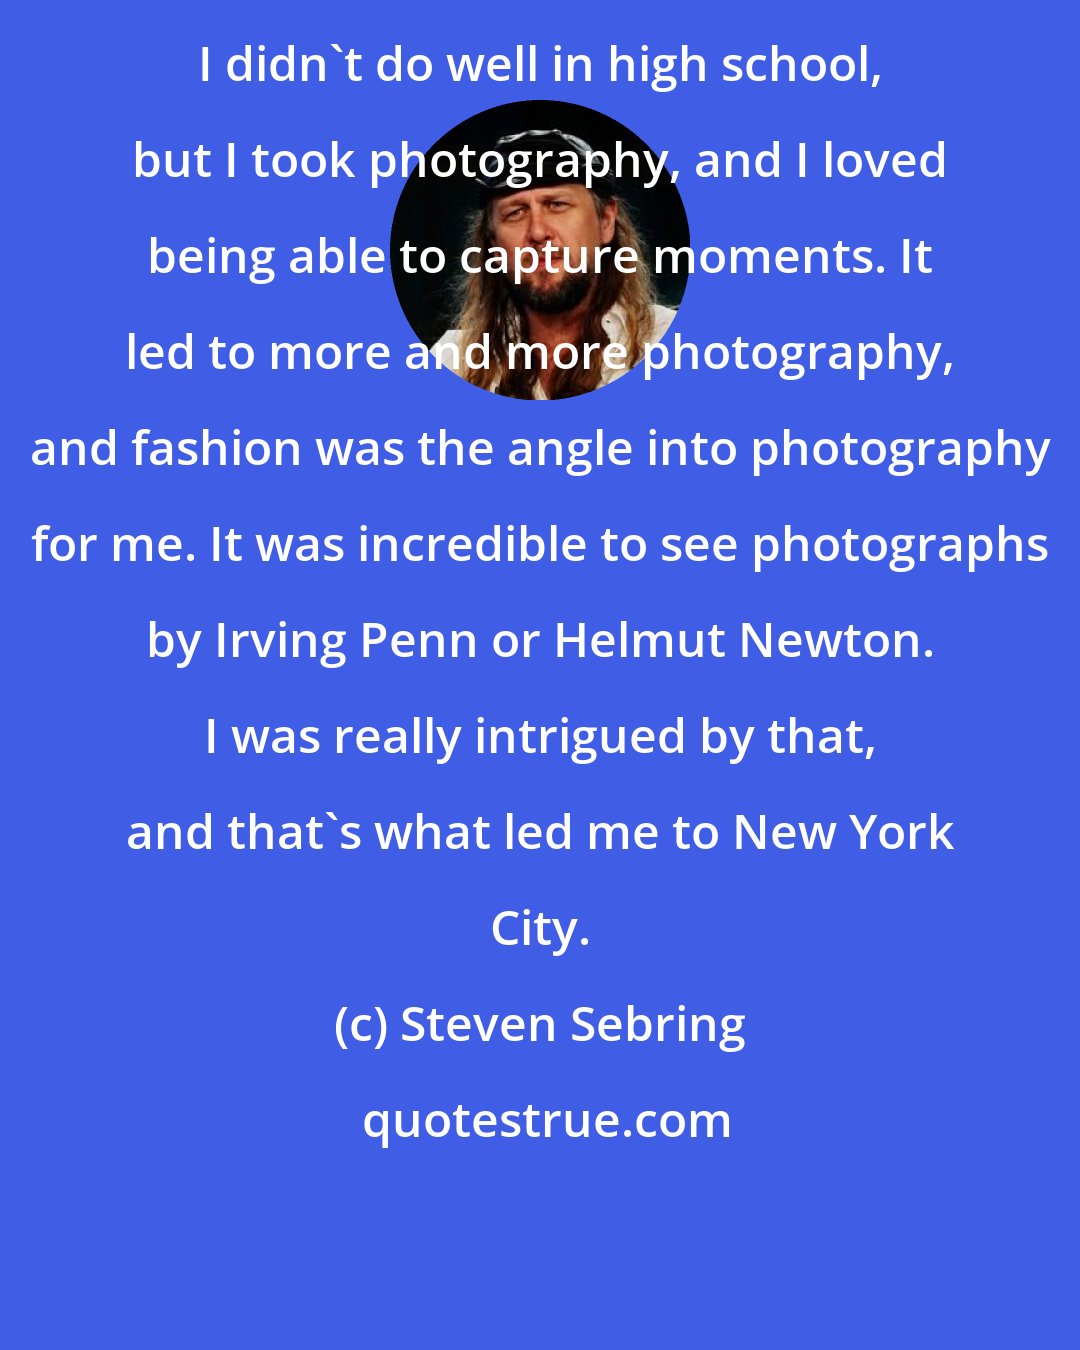 Steven Sebring: I didn't do well in high school, but I took photography, and I loved being able to capture moments. It led to more and more photography, and fashion was the angle into photography for me. It was incredible to see photographs by Irving Penn or Helmut Newton. I was really intrigued by that, and that's what led me to New York City.